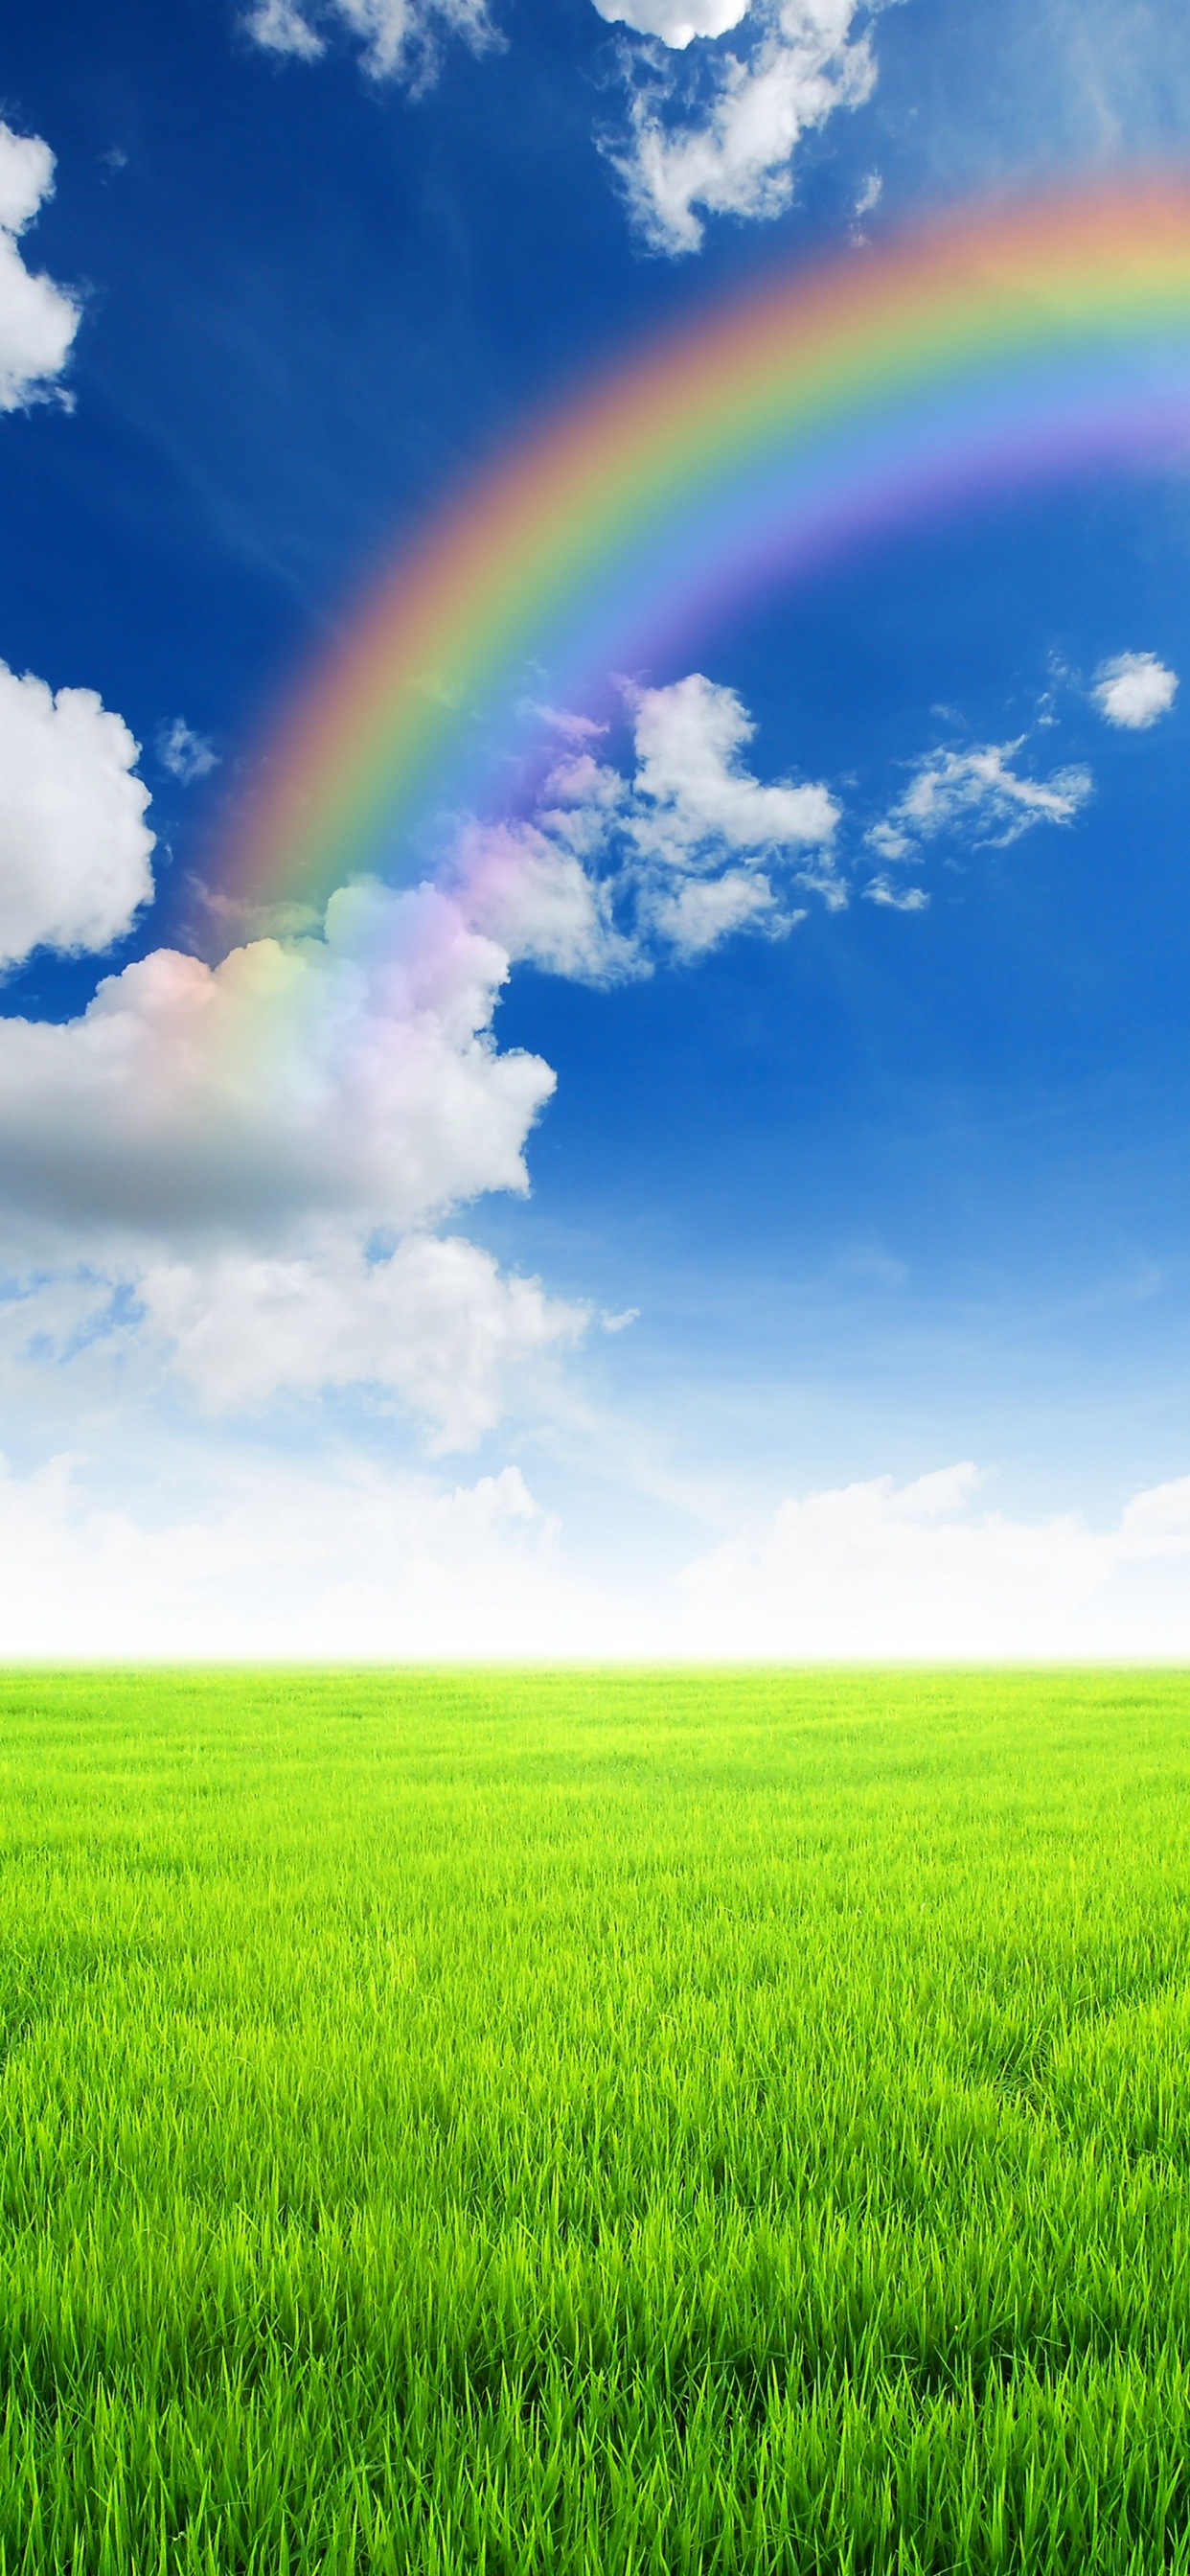 Green Grass Field Under Blue Sky and White Clouds During Daytime. Wallpaper in 1242x2688 Resolution